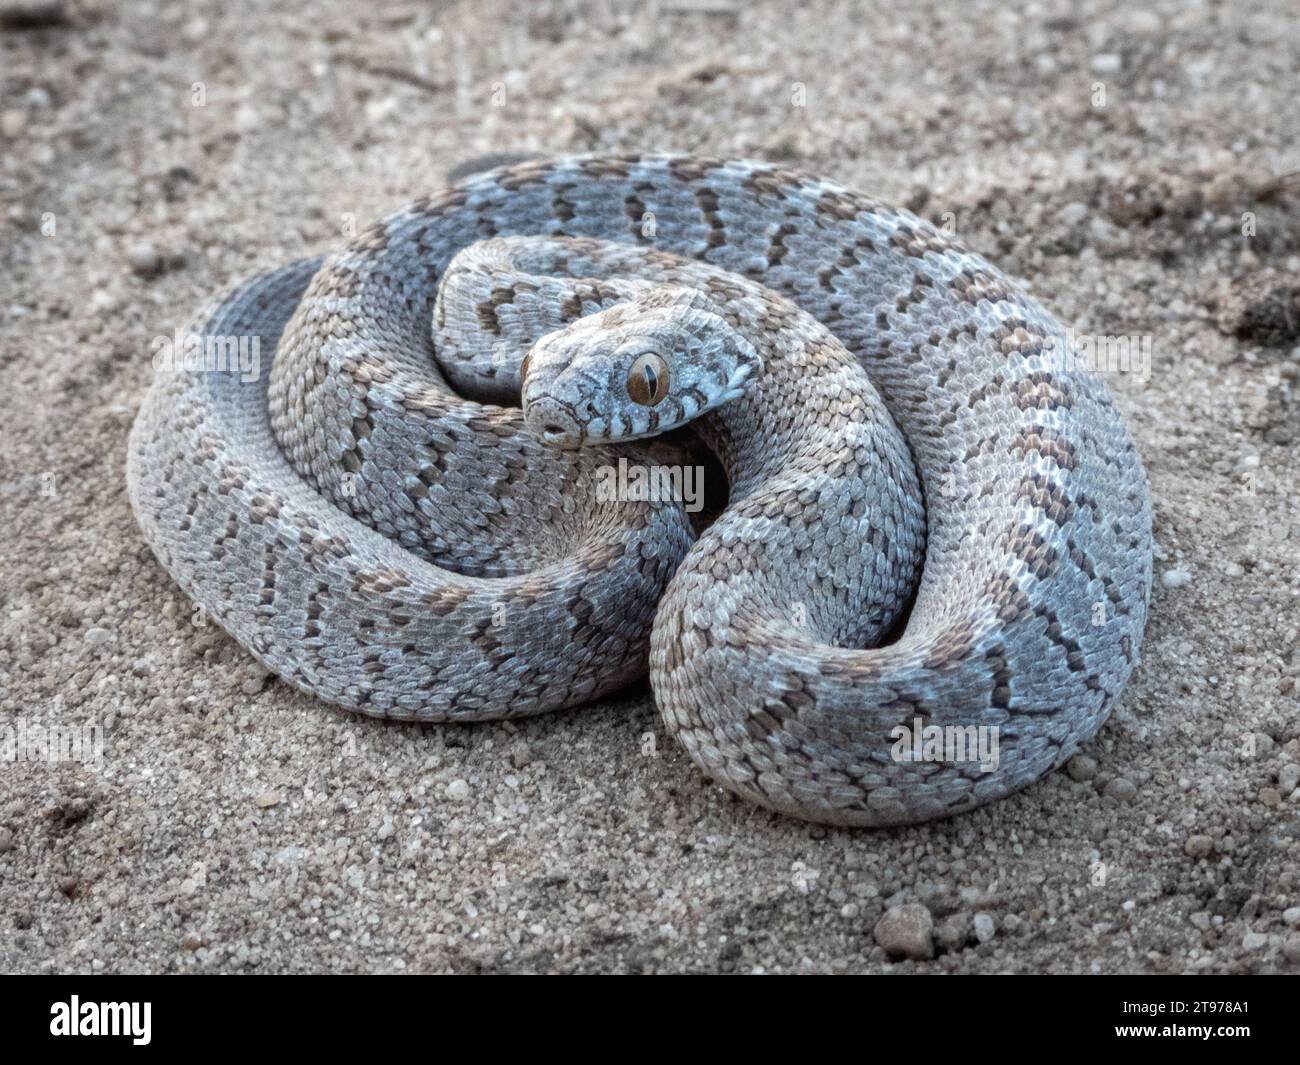 A rhombic Egg-Eater (Dasypeltis scabra), a harmless snake from South Africa slithering through sandy terrain Stock Photo